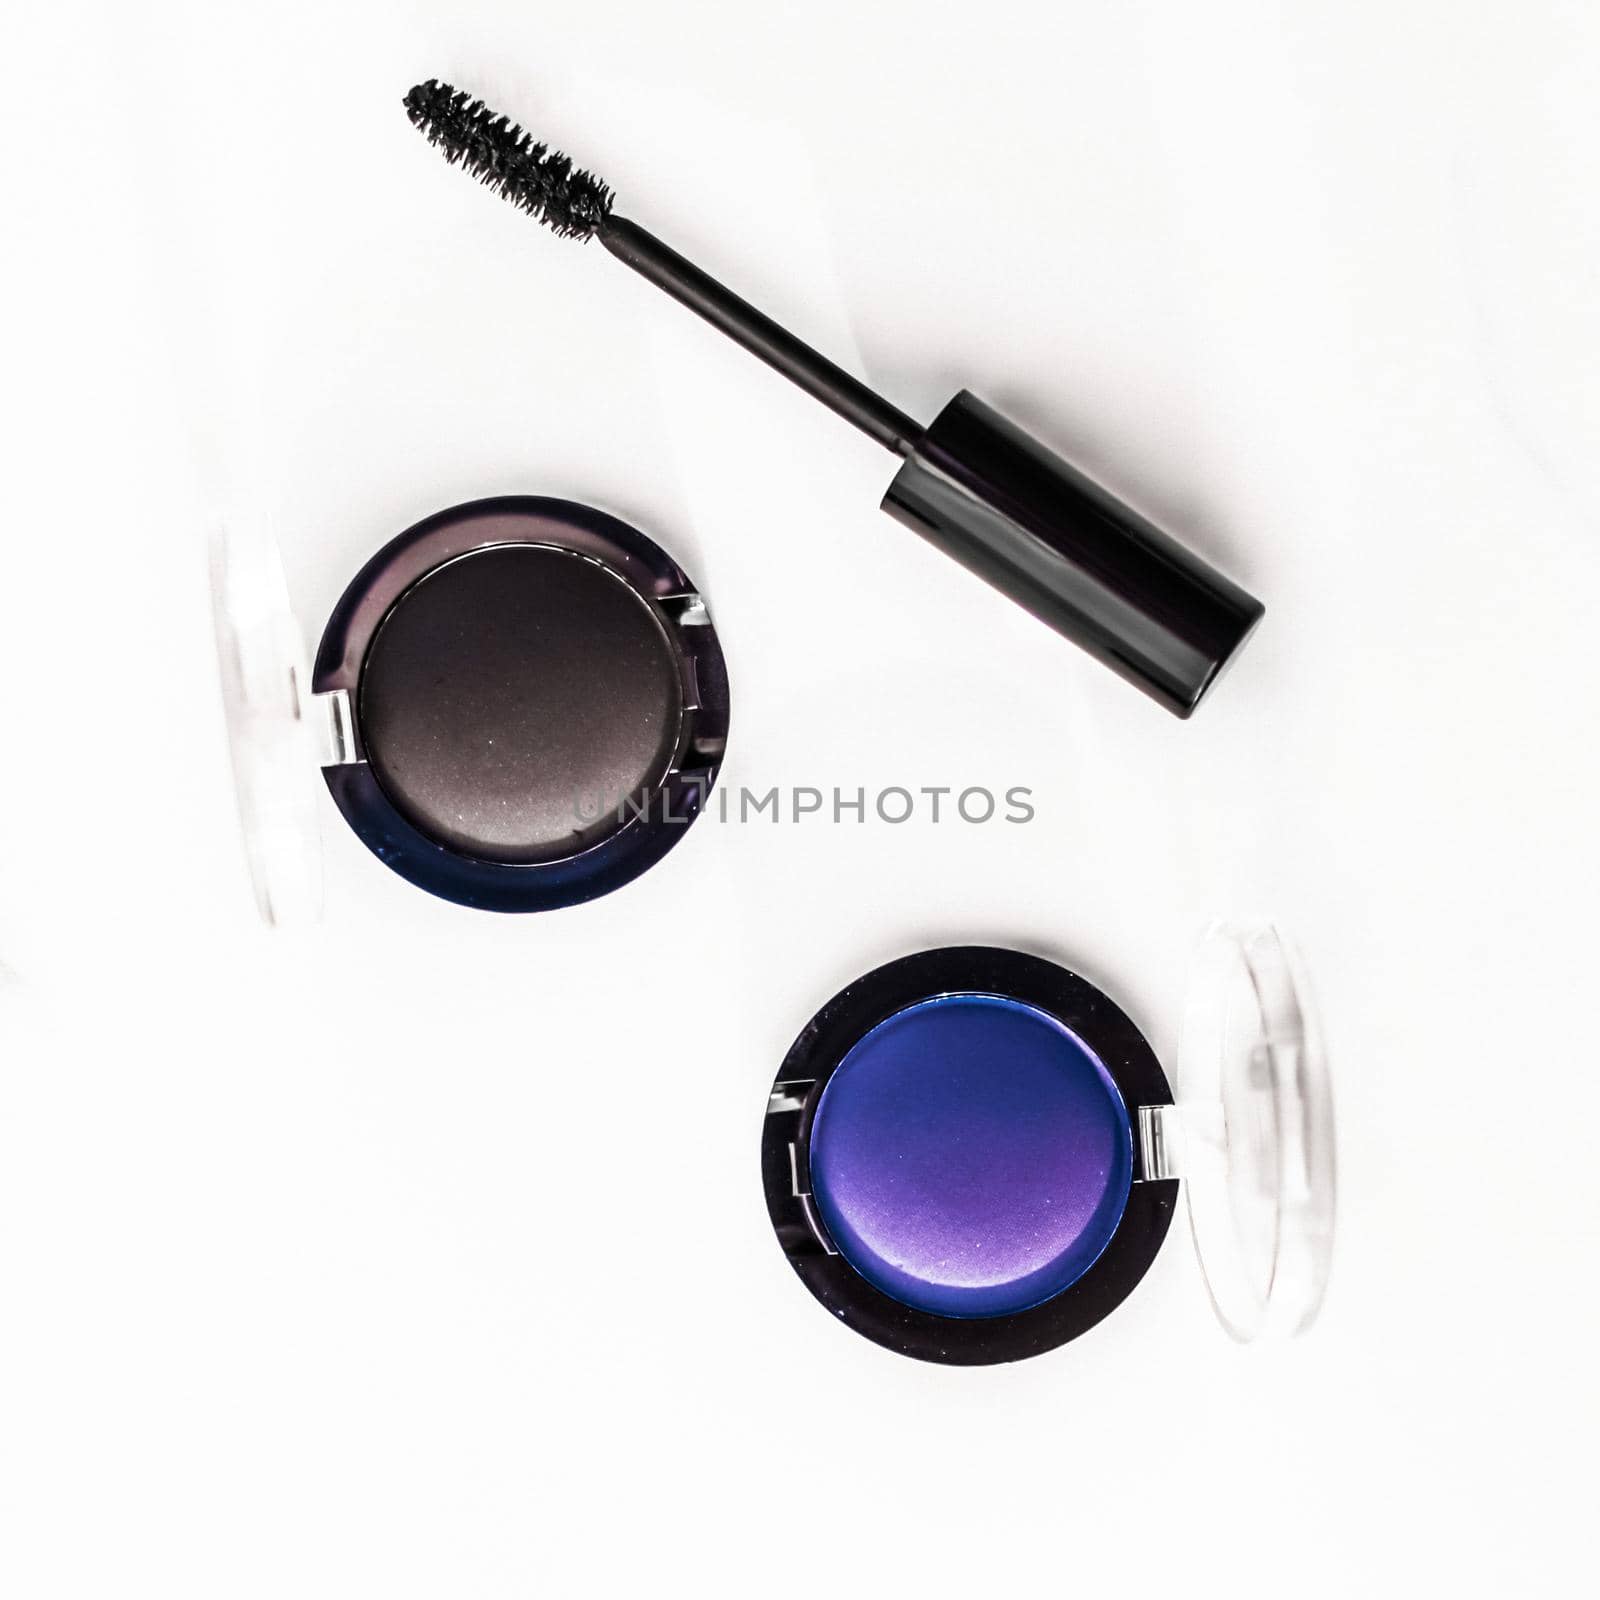 Eyeshadows, black liner and mascara on marble background, eye shadows cosmetics as glamour make-up products for luxury beauty brand, holiday flatlay design by Anneleven